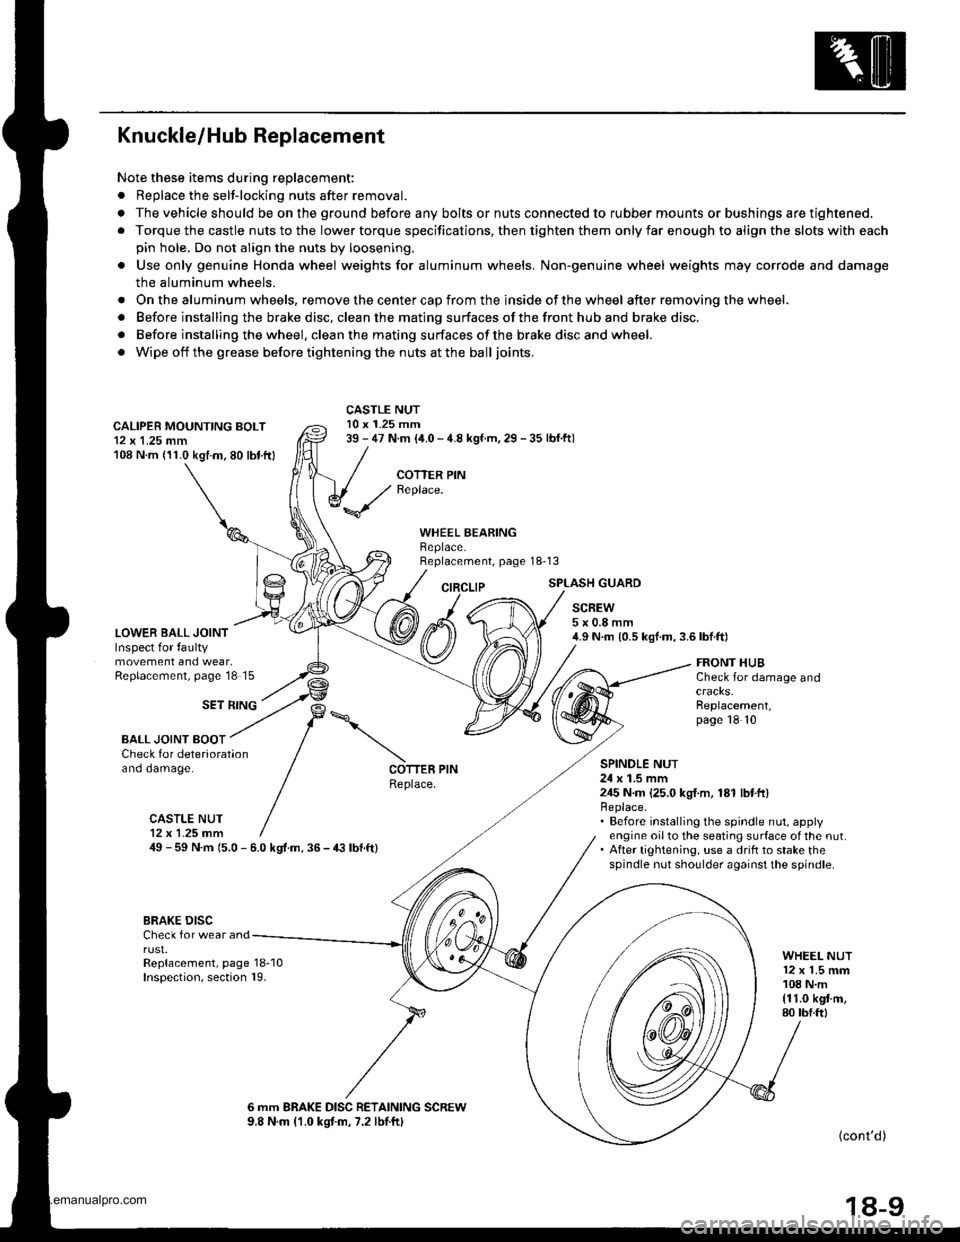 HONDA CR-V 2000 RD1-RD3 / 1.G Workshop Manual 
Knuckle/Hub Replacement
Note these items during replacement:
. Replace the selt-locking nuts after removal.
. The vehicle should be on the ground before any bolts or nuts connected to rubber mounts o